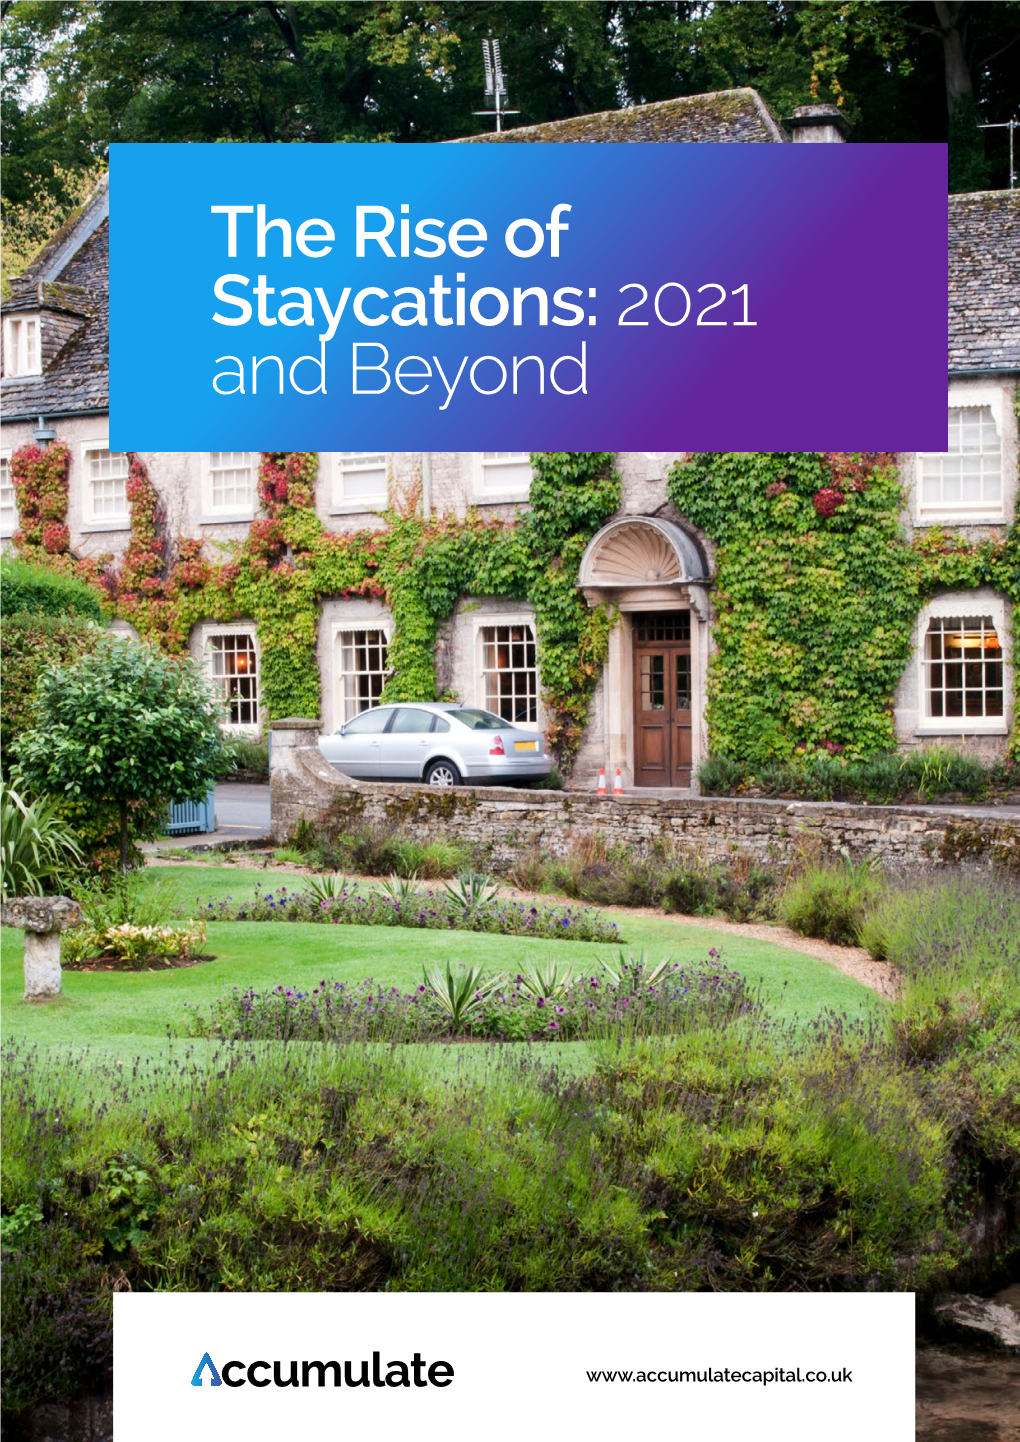 The Rise of Staycations: 2021 and Beyond